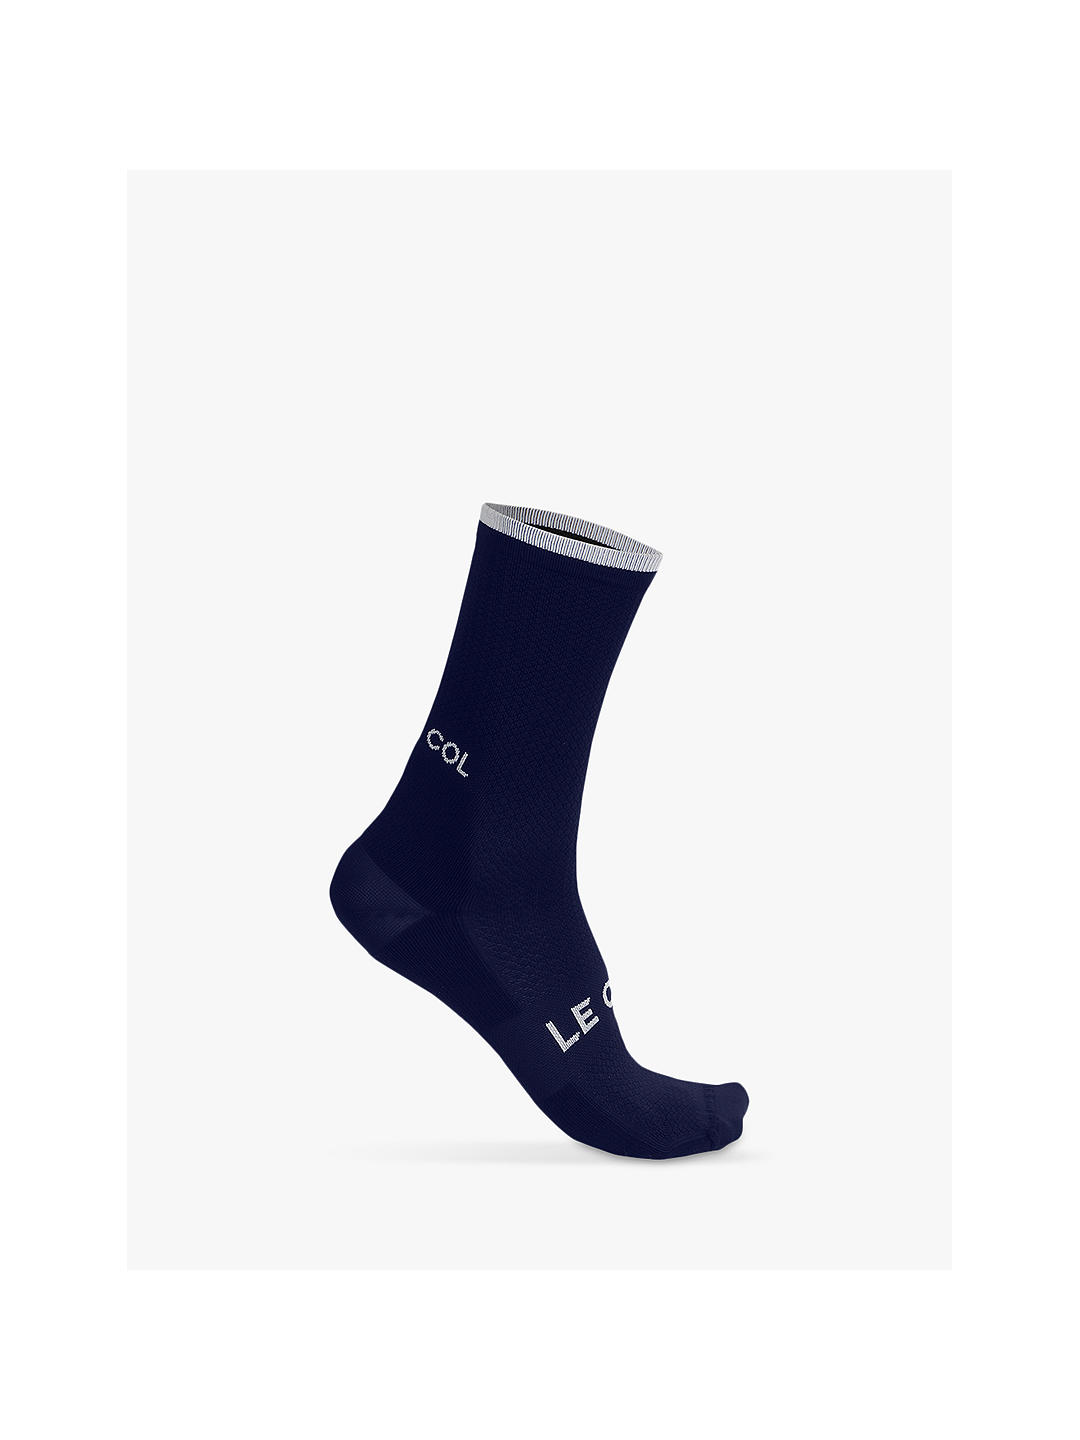 Le Col Cycling Socks, Navy/White